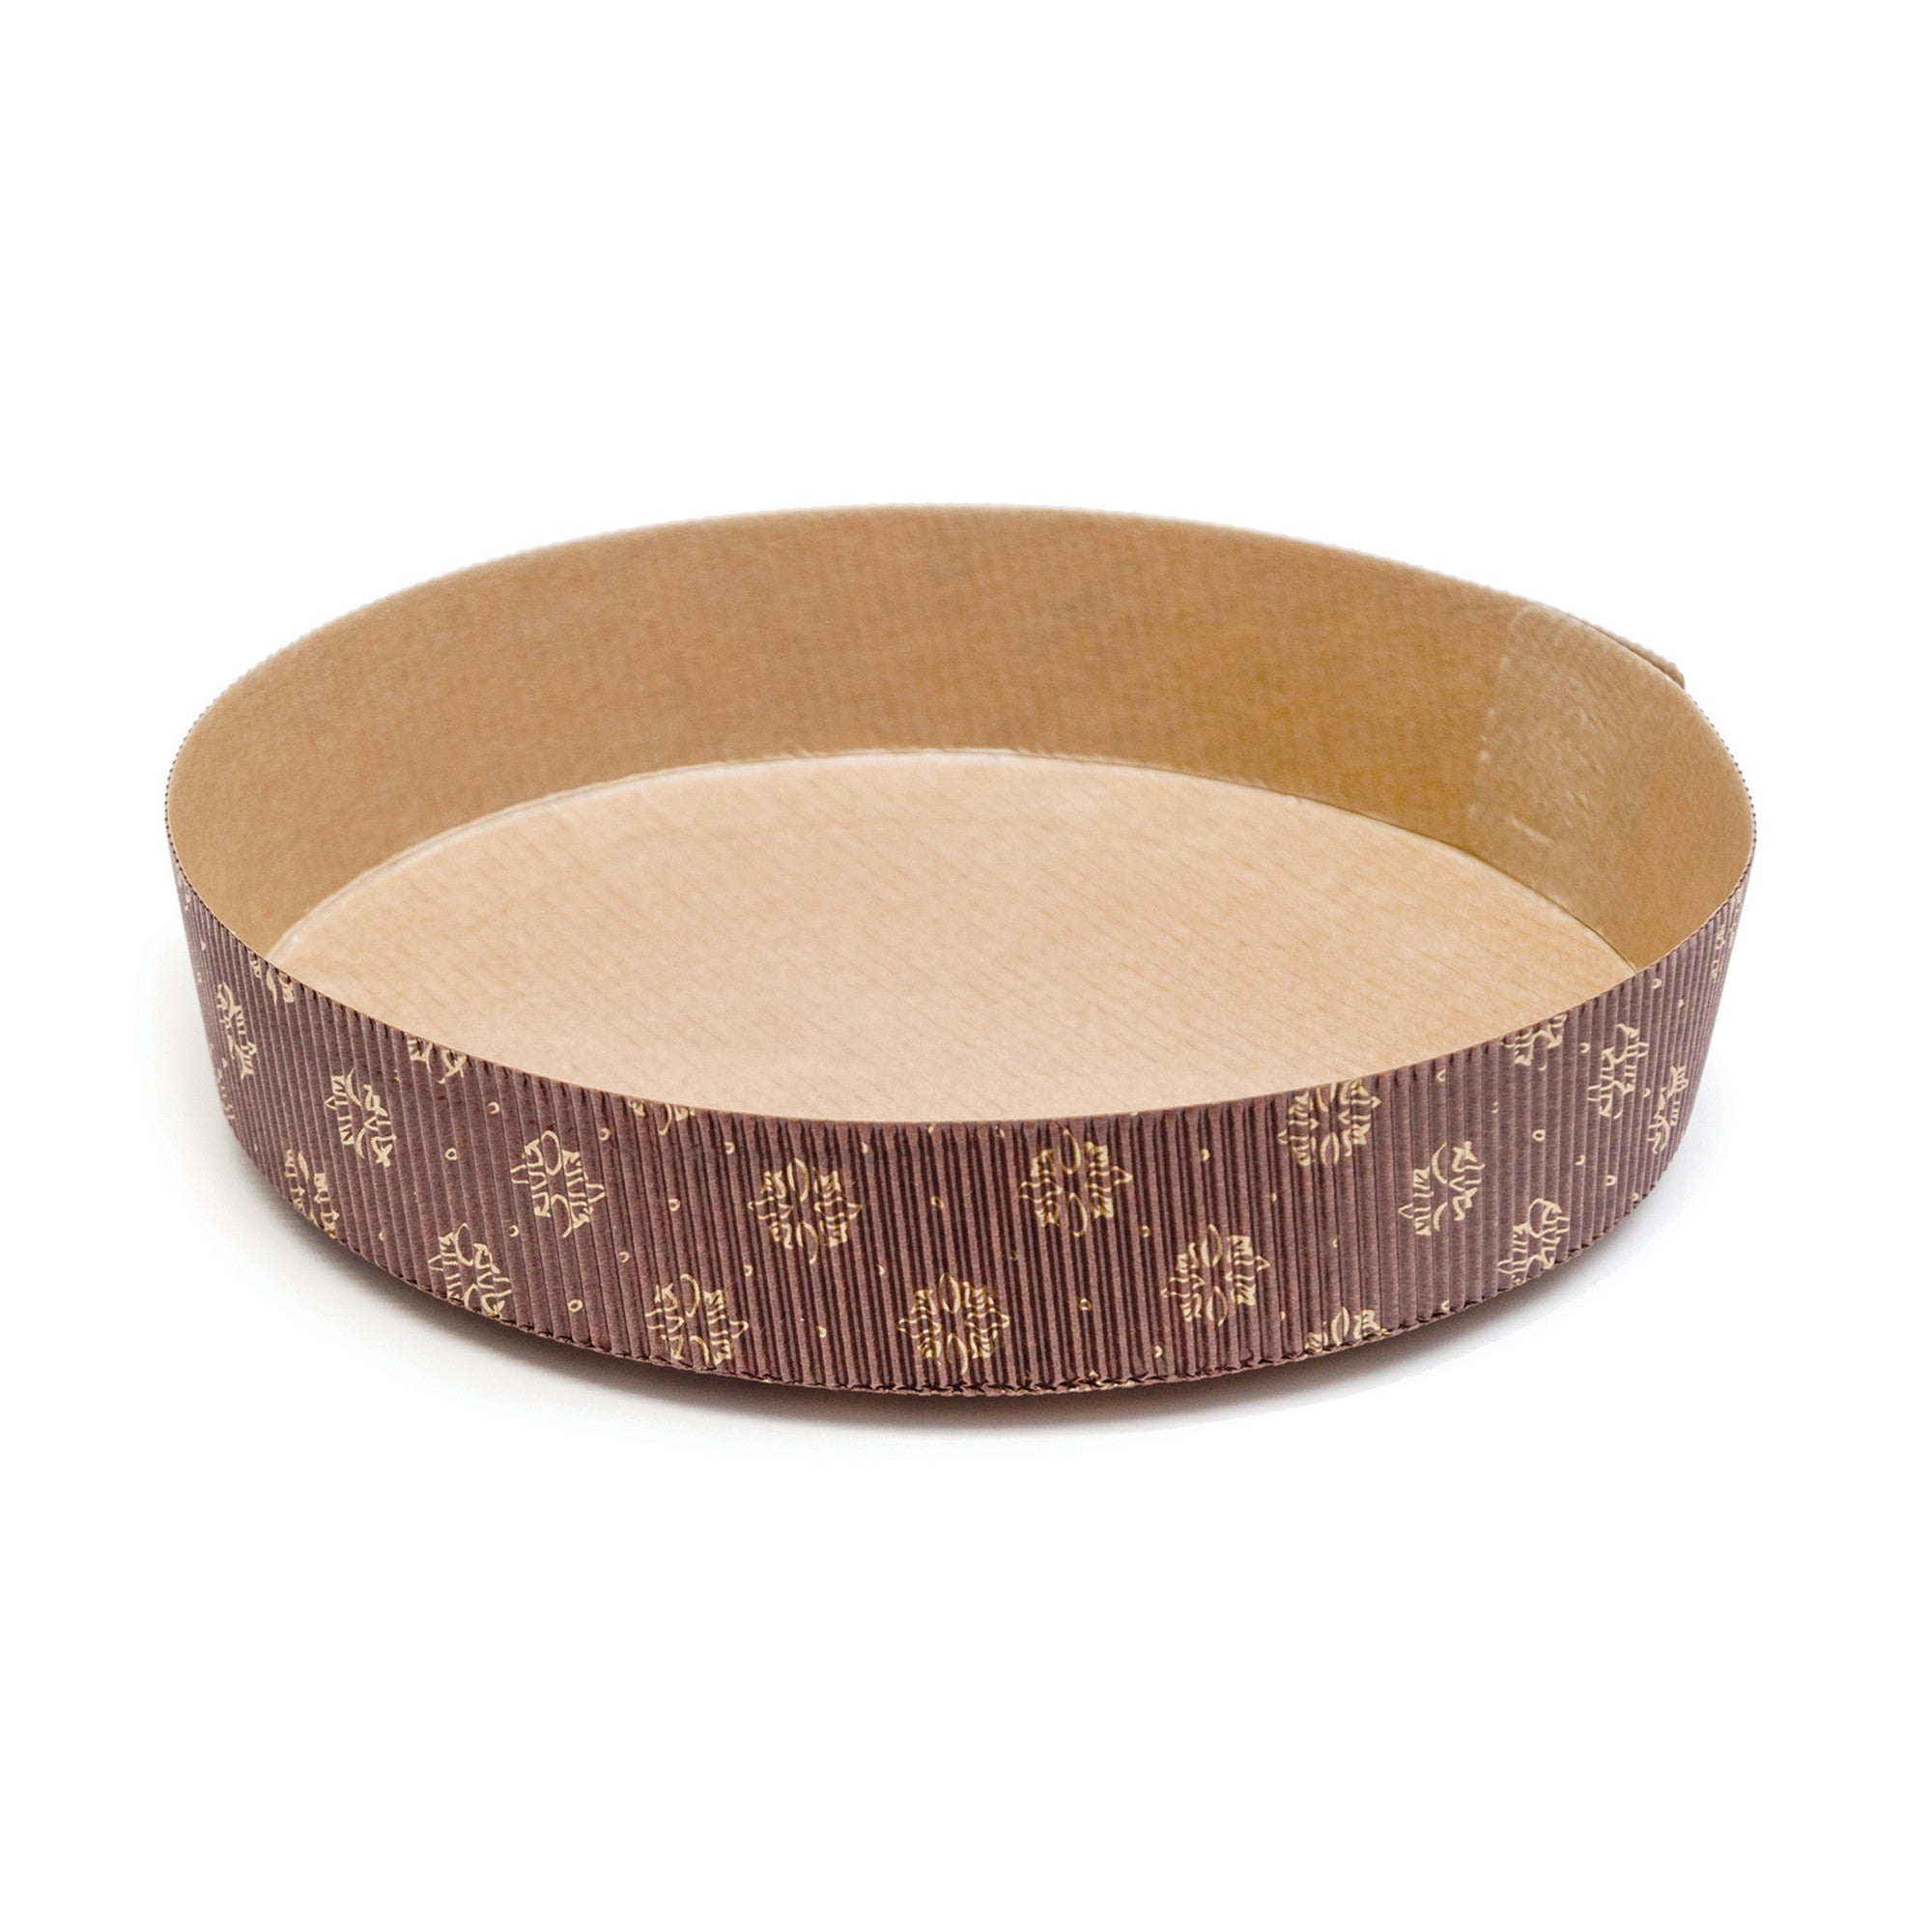 Round Baking Pans, PB10030 - Welcome Home Brands